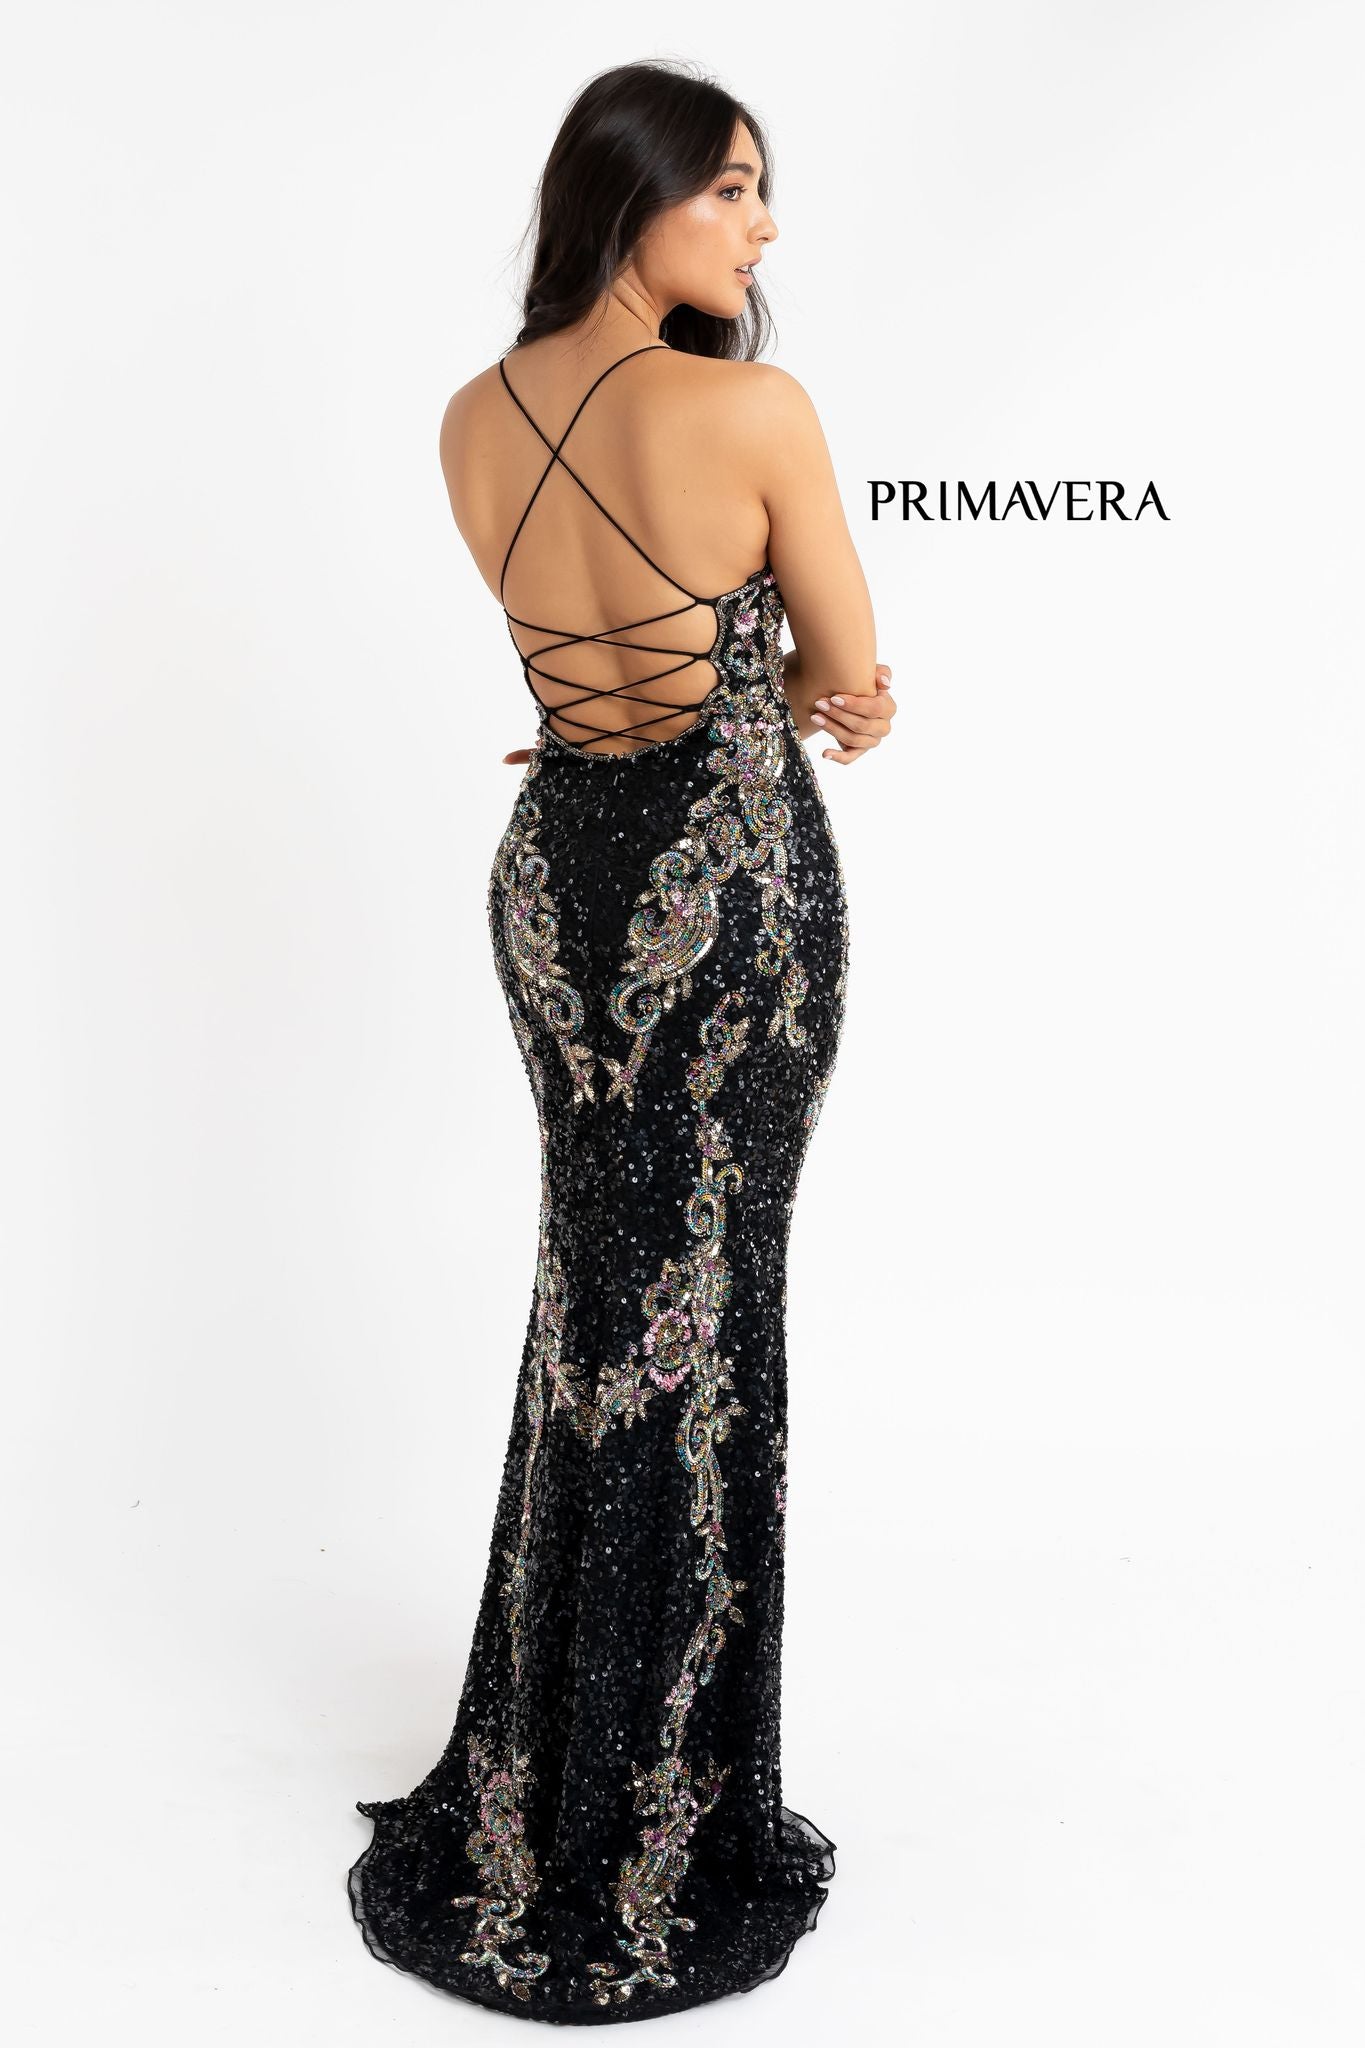 Primavera Couture 3211 black is a Long fitted sequin Embellished Formal Evening Gown. This Prom Dress Features a deep V Neck with an open Corset lace up back. Beaded & embellished elegant scroll pattern accentuate curves. Fully beaded prom dress with floral pattern and side slit. Long Sequin Gown featuring a v neckline. slit in the fitted skirt, Slit in Thigh. Stunning Pageant Dress, Prom Gown & More!